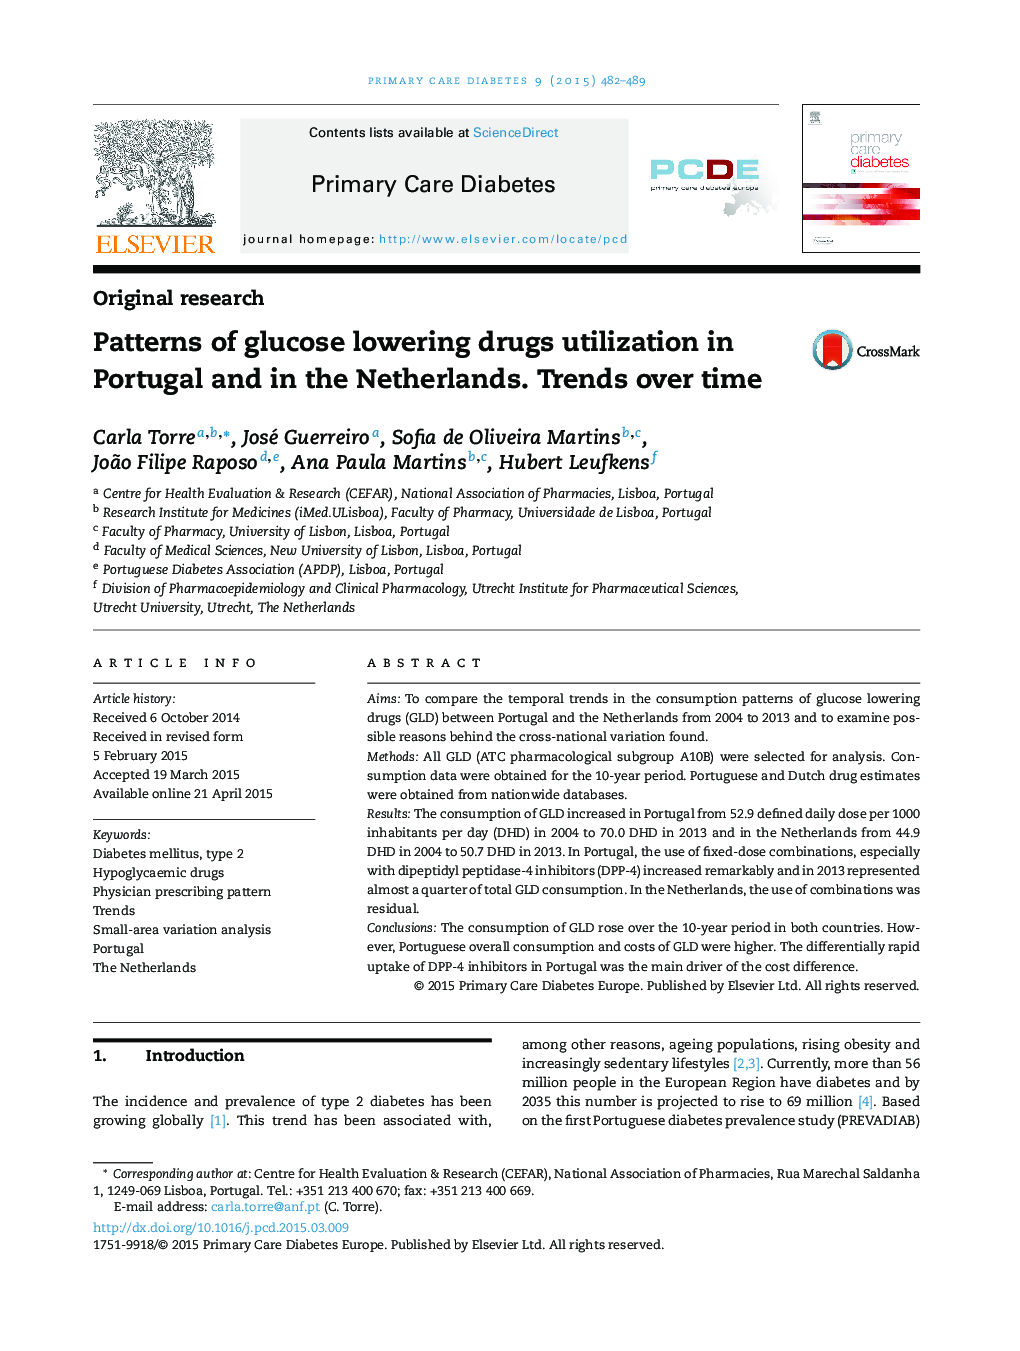 Patterns of glucose lowering drugs utilization in Portugal and in the Netherlands. Trends over time